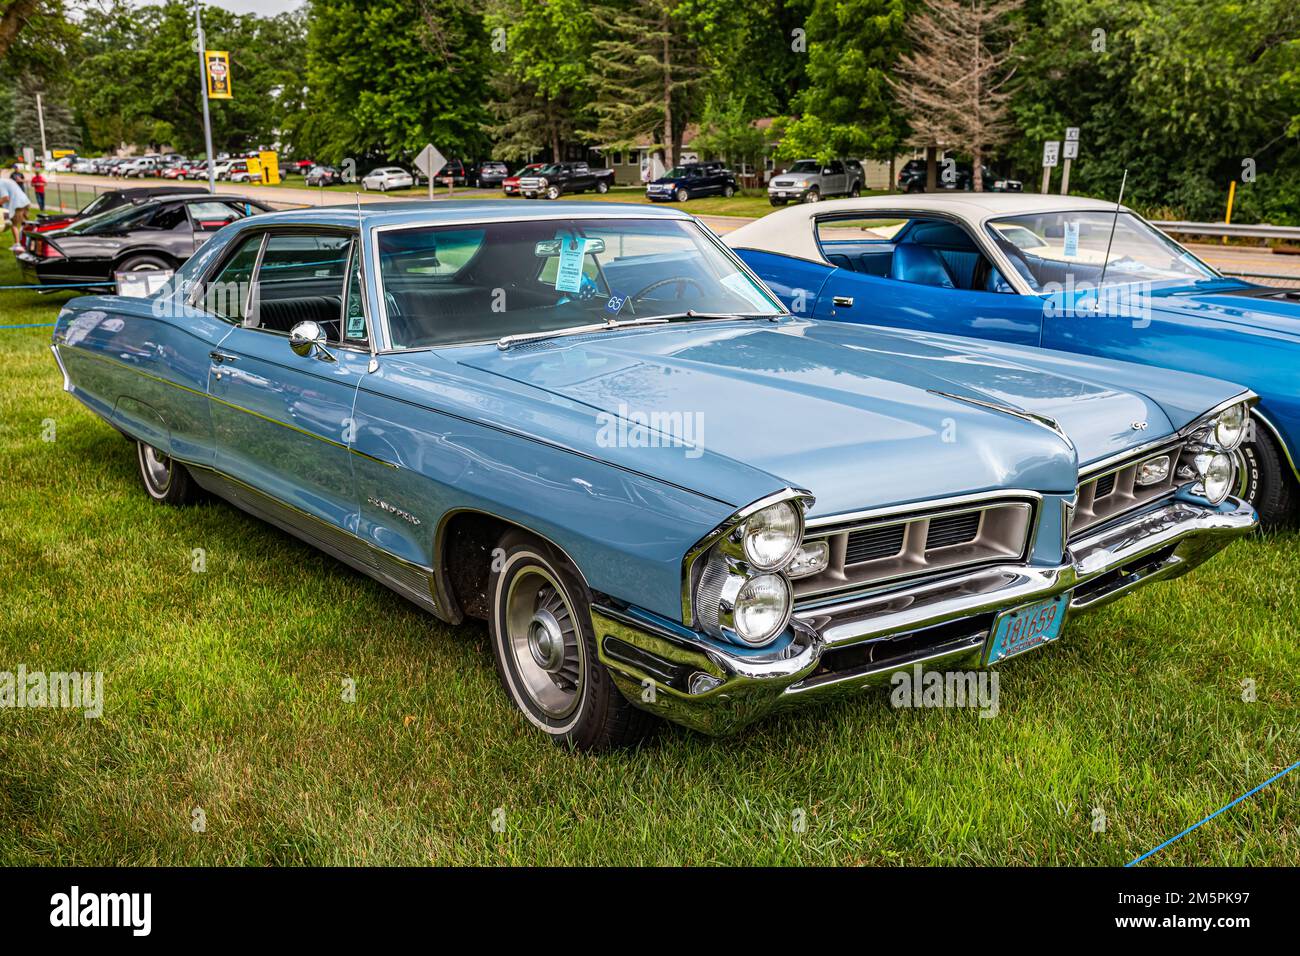 Iola, WI - July 07, 2022: High perspective front corner view of a 1965 Pontiac Grand Prix Hardtop Coupe at a local car show. Stock Photo